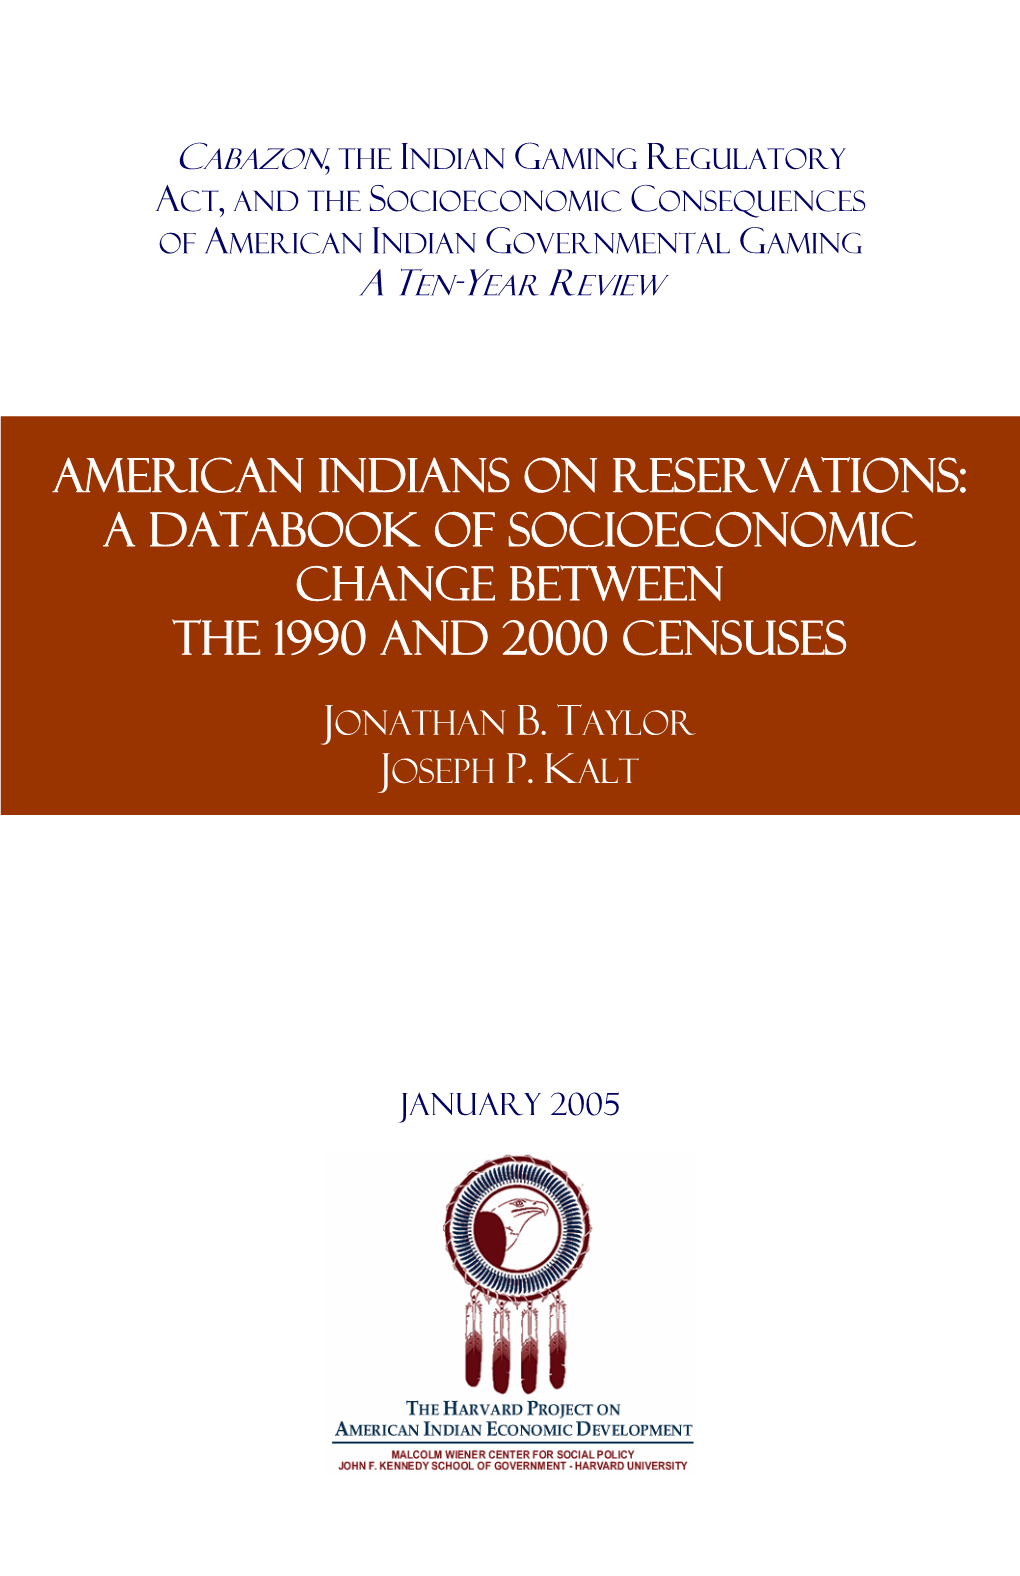 American Indians on Reservations: a Databook of Socioeconomic Change Between the 1990 and 2000 Censuses JONATHAN B